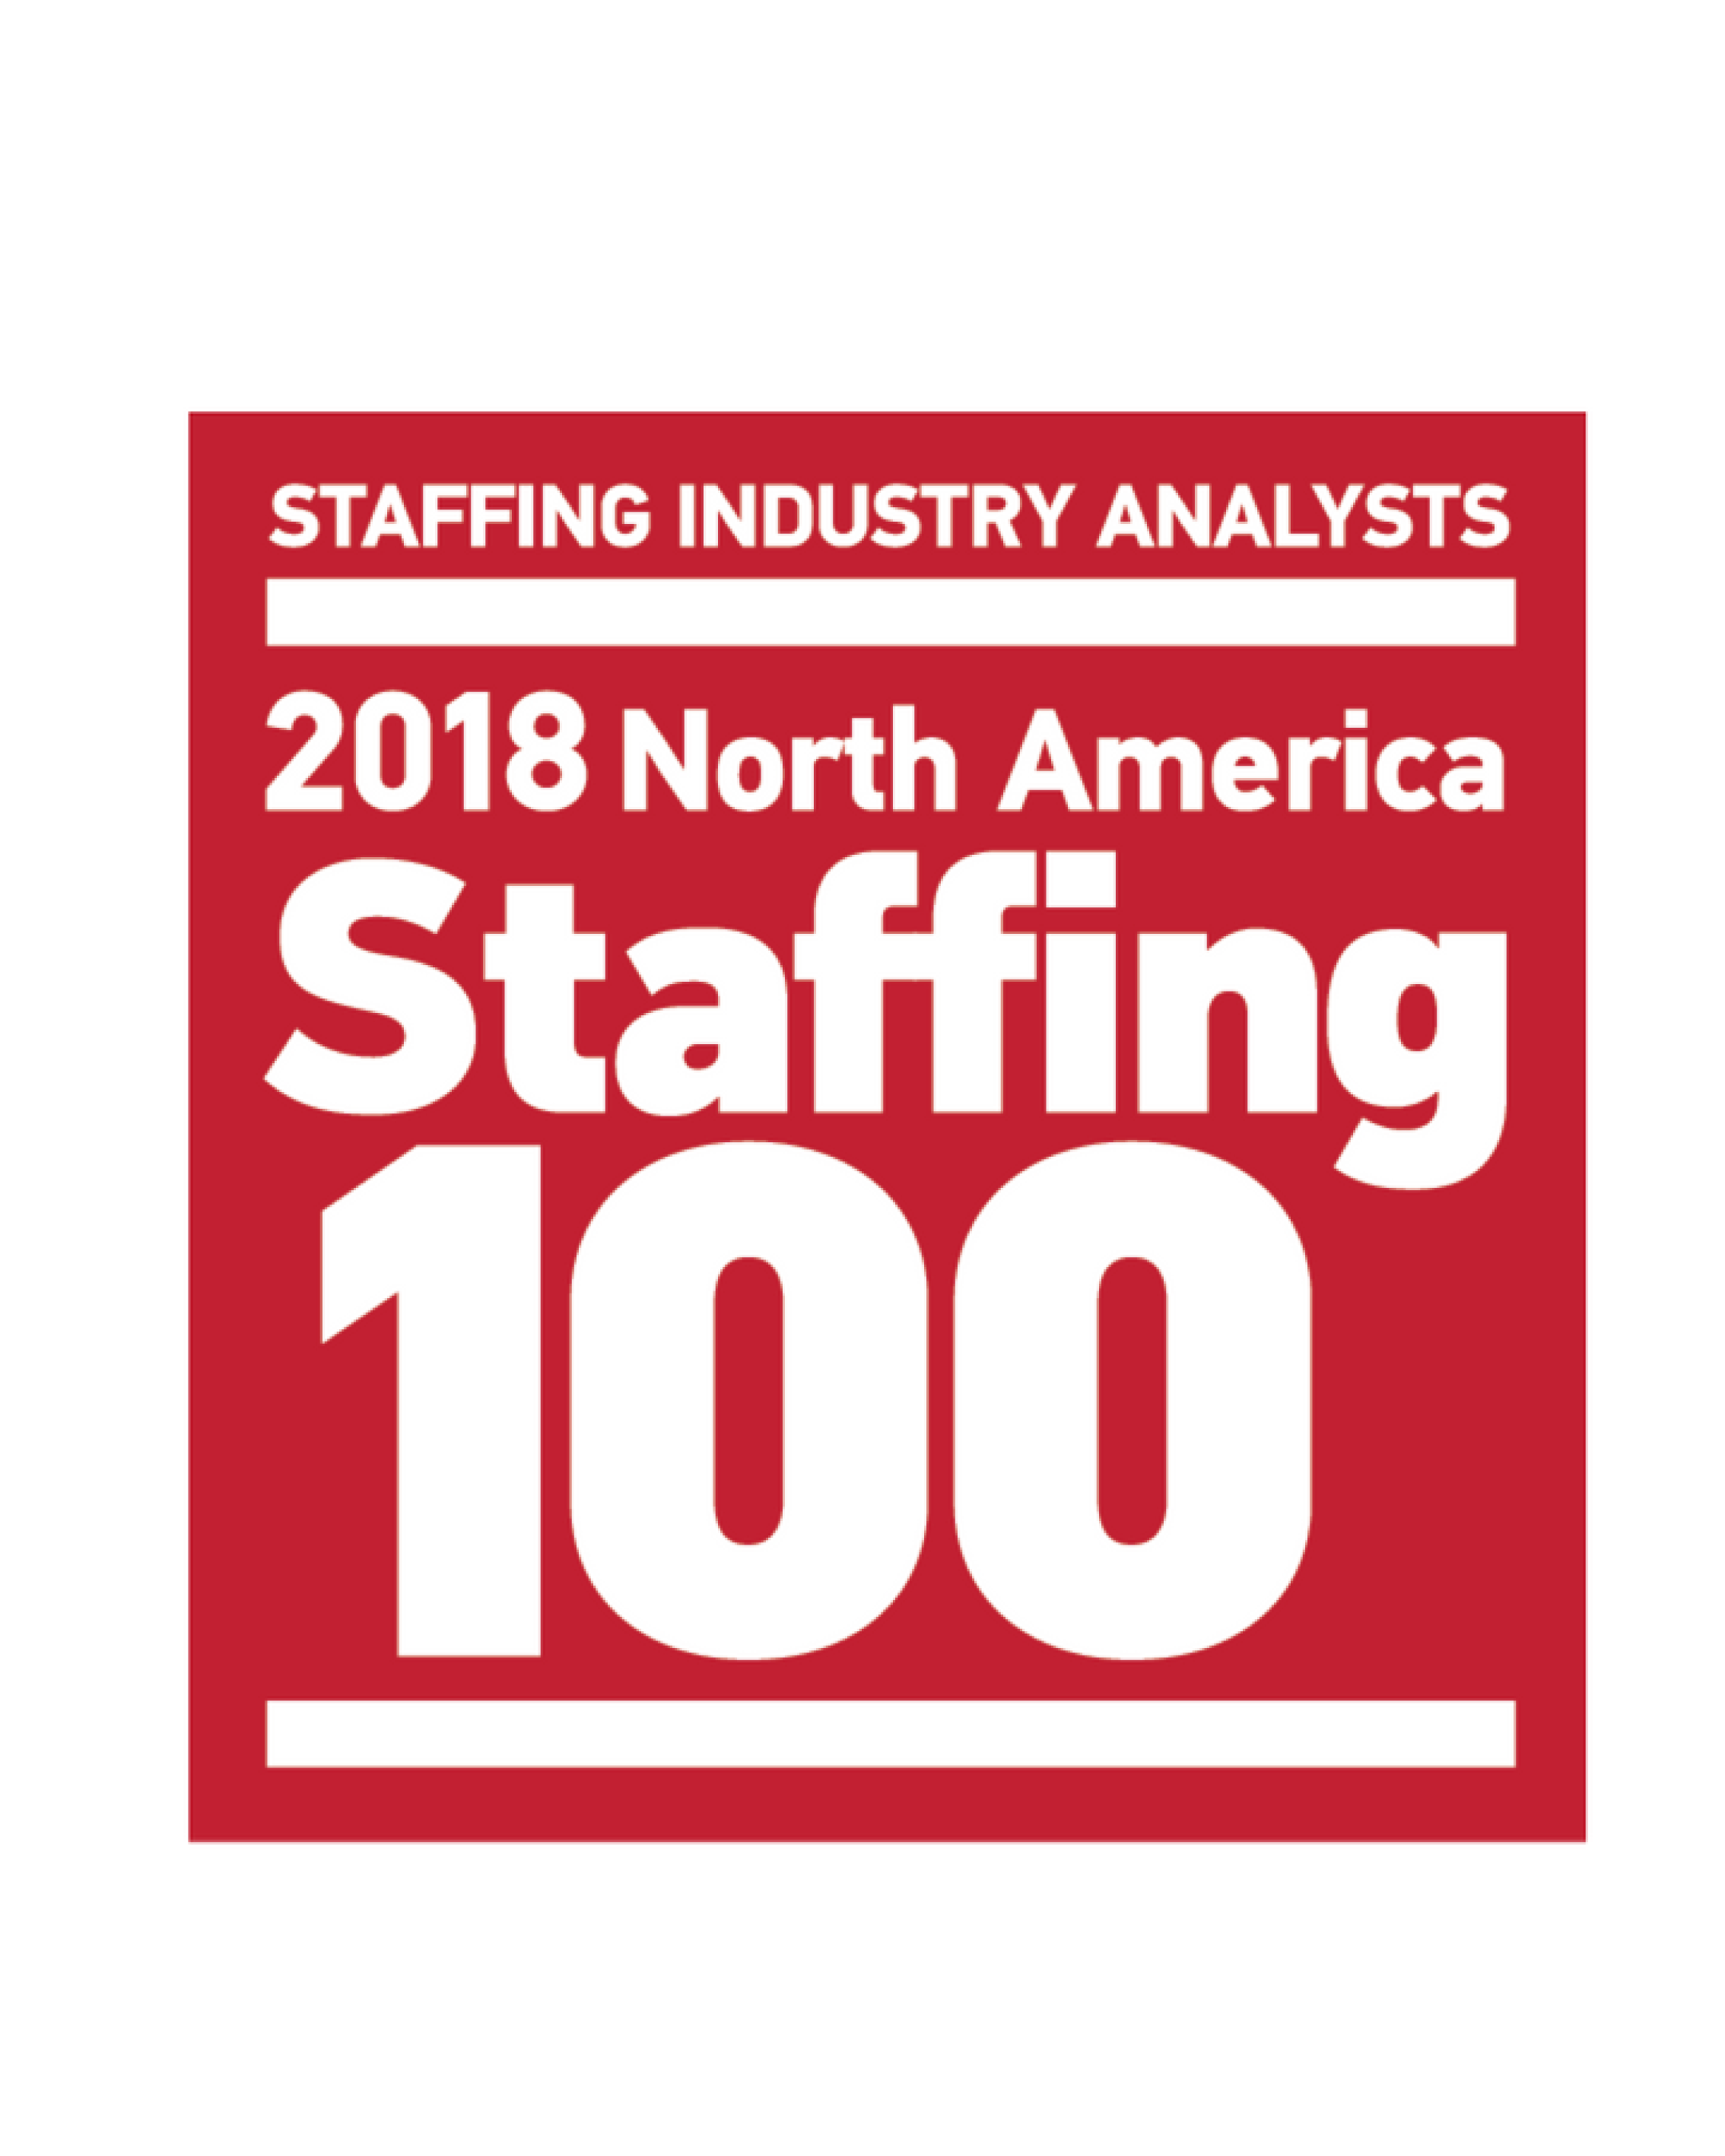 Top 100 staffing firms in North America